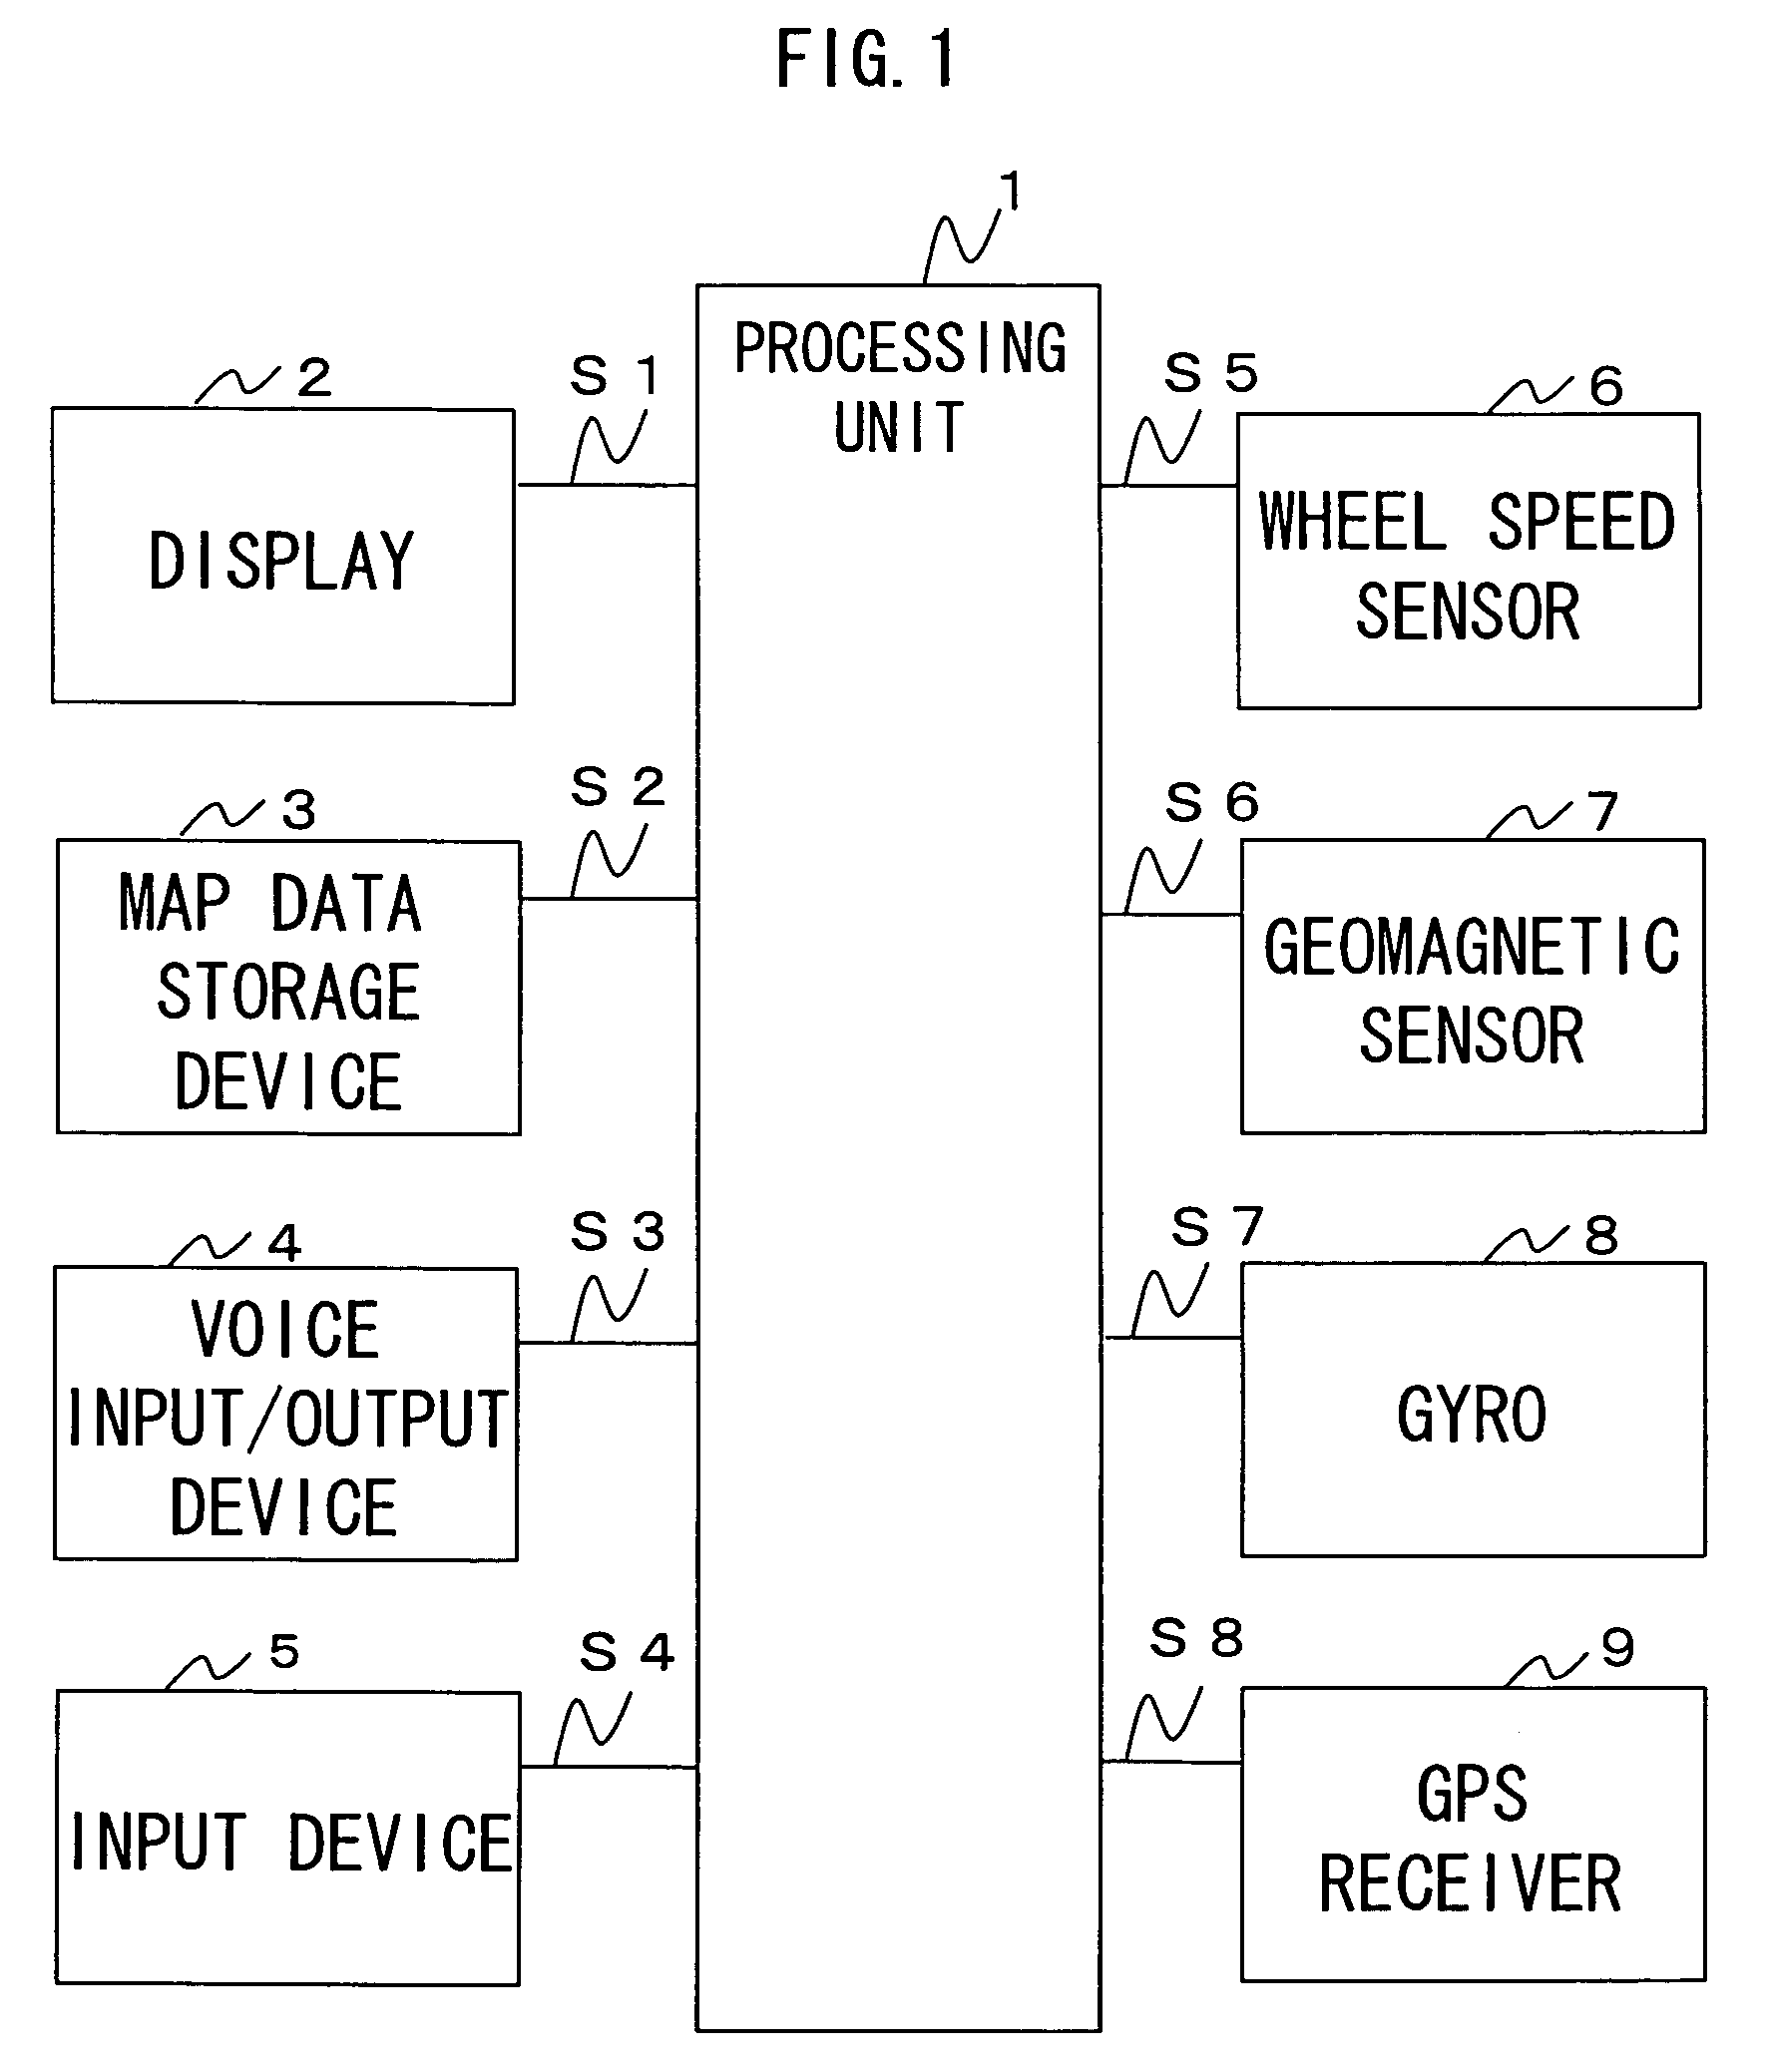 Route searching arrangements (e.g., method, process) in navigation system